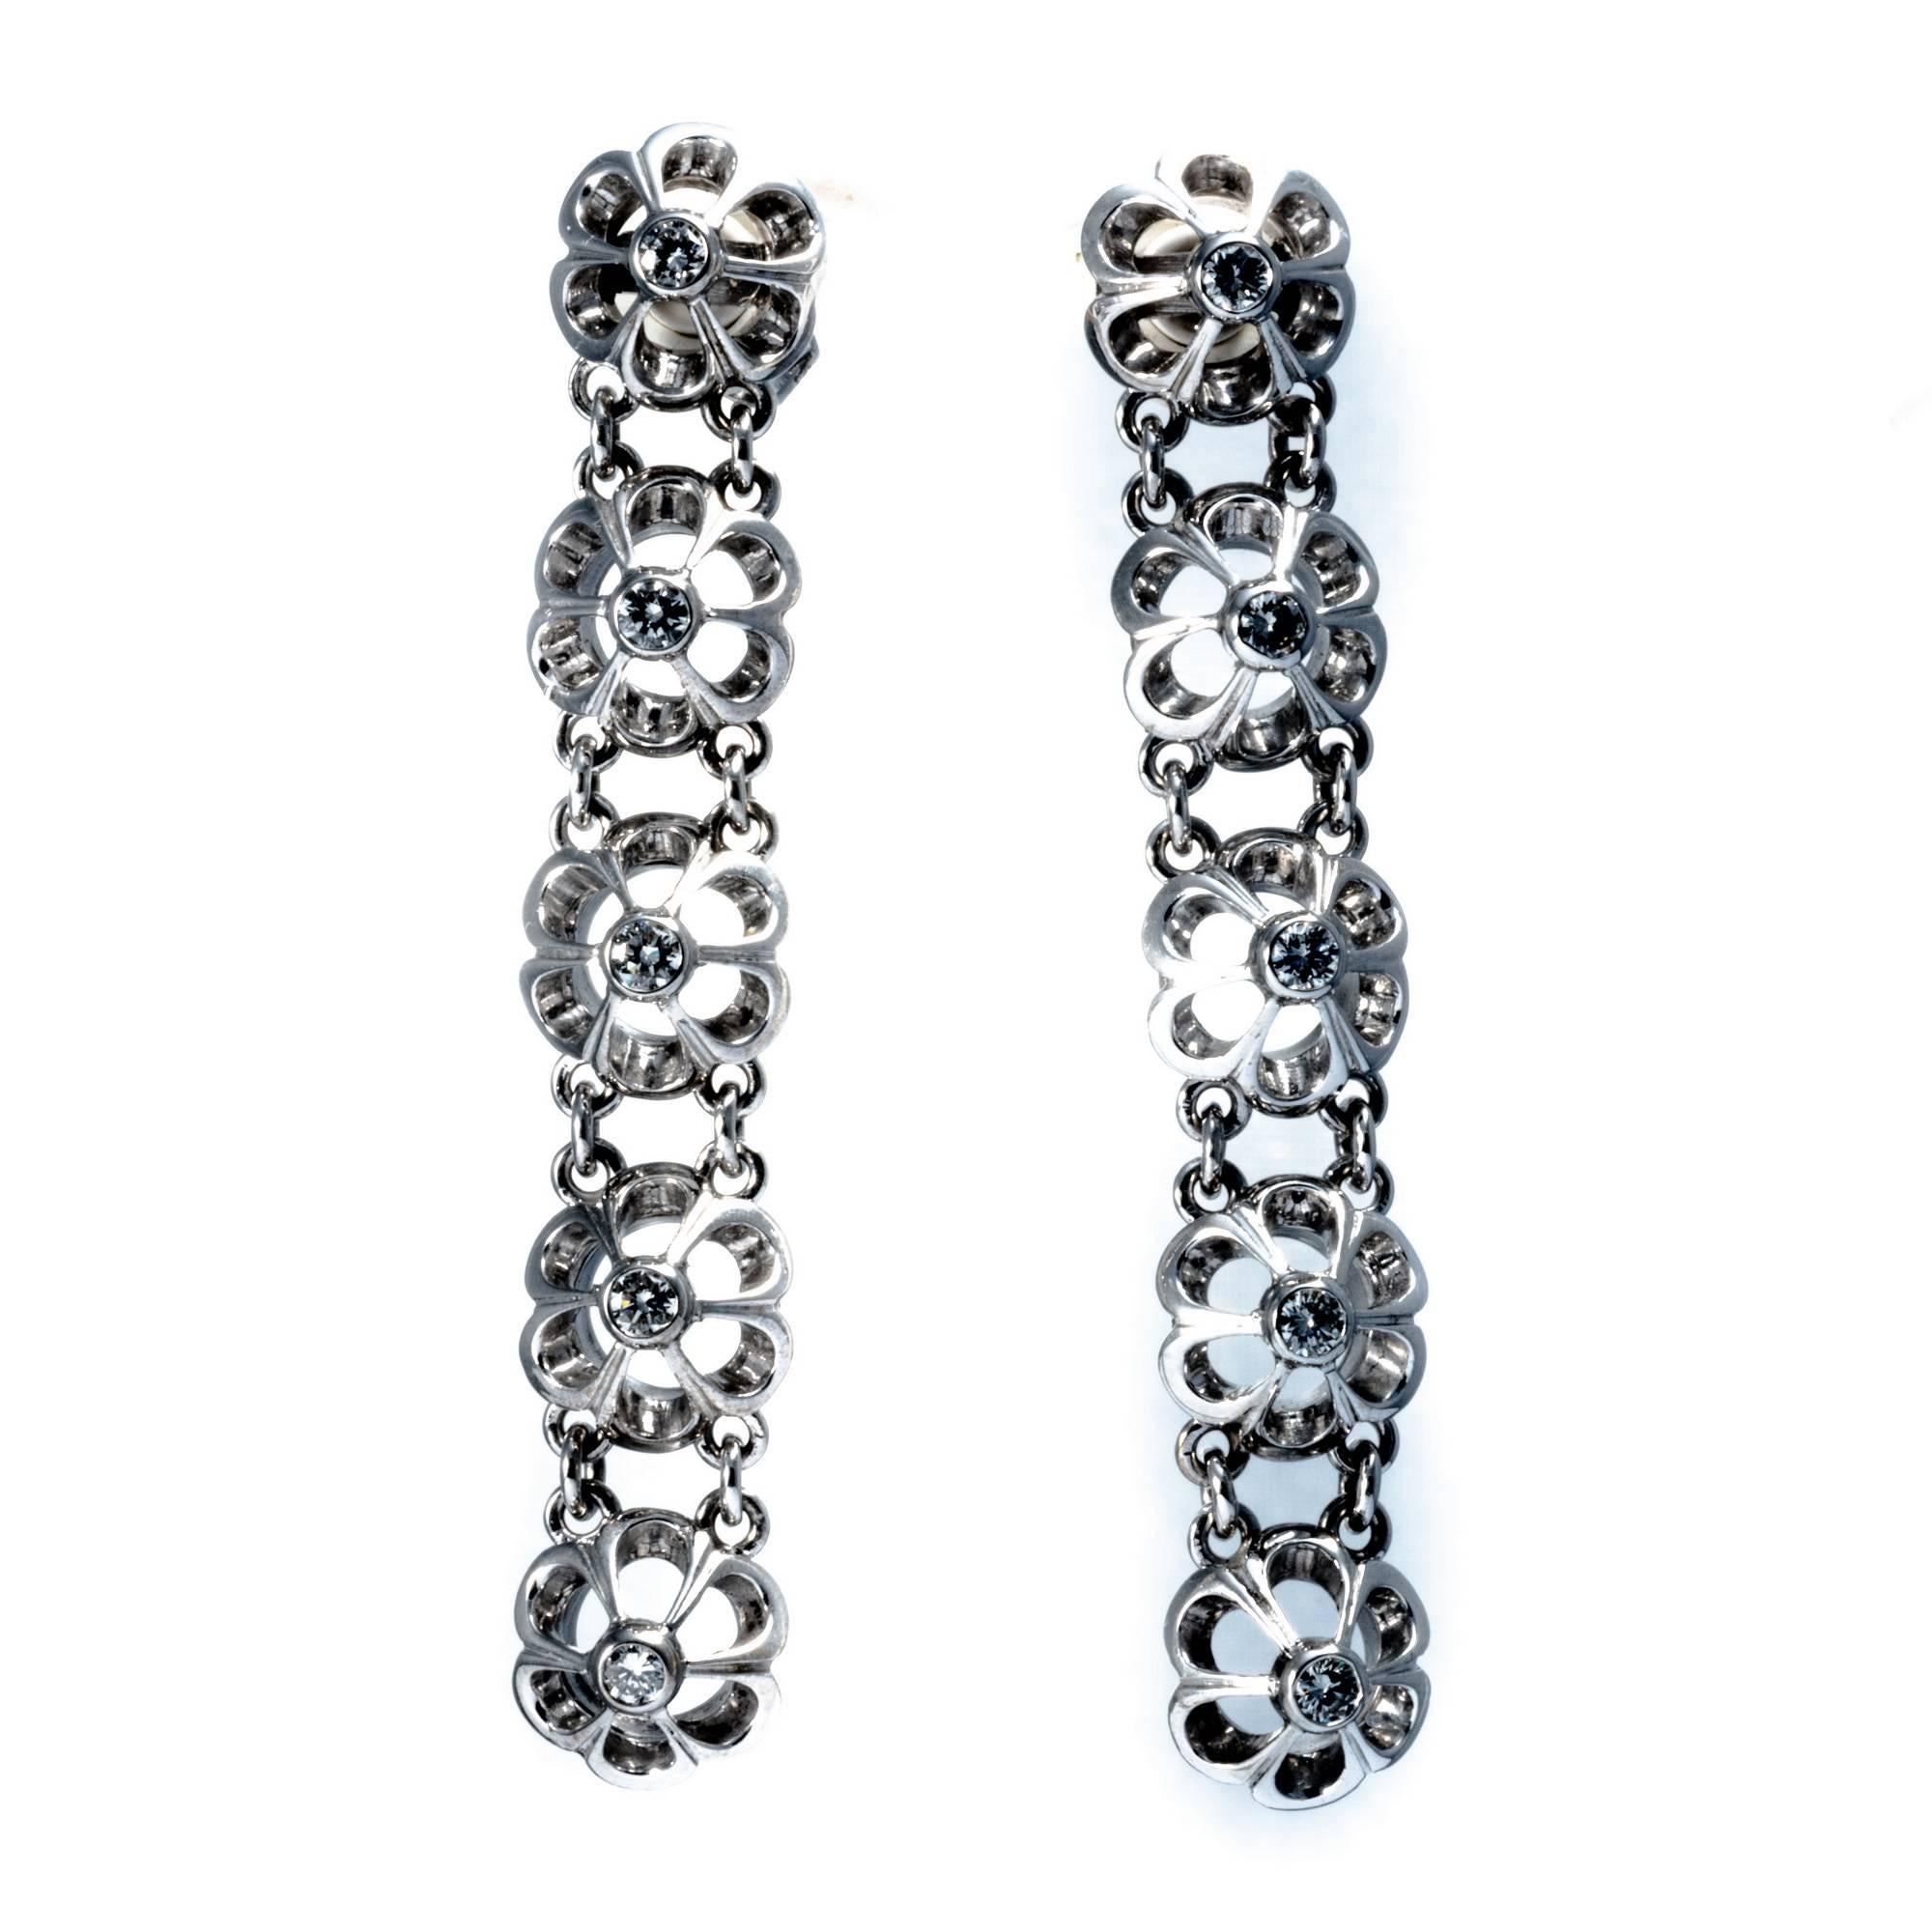 This retro dangle earrings handcrafted in white gold in the 1950's, feature 10 stylized flowers, each of which is enlightened by a diamond at the centre. Approximate diamond total weight is carats 0.60